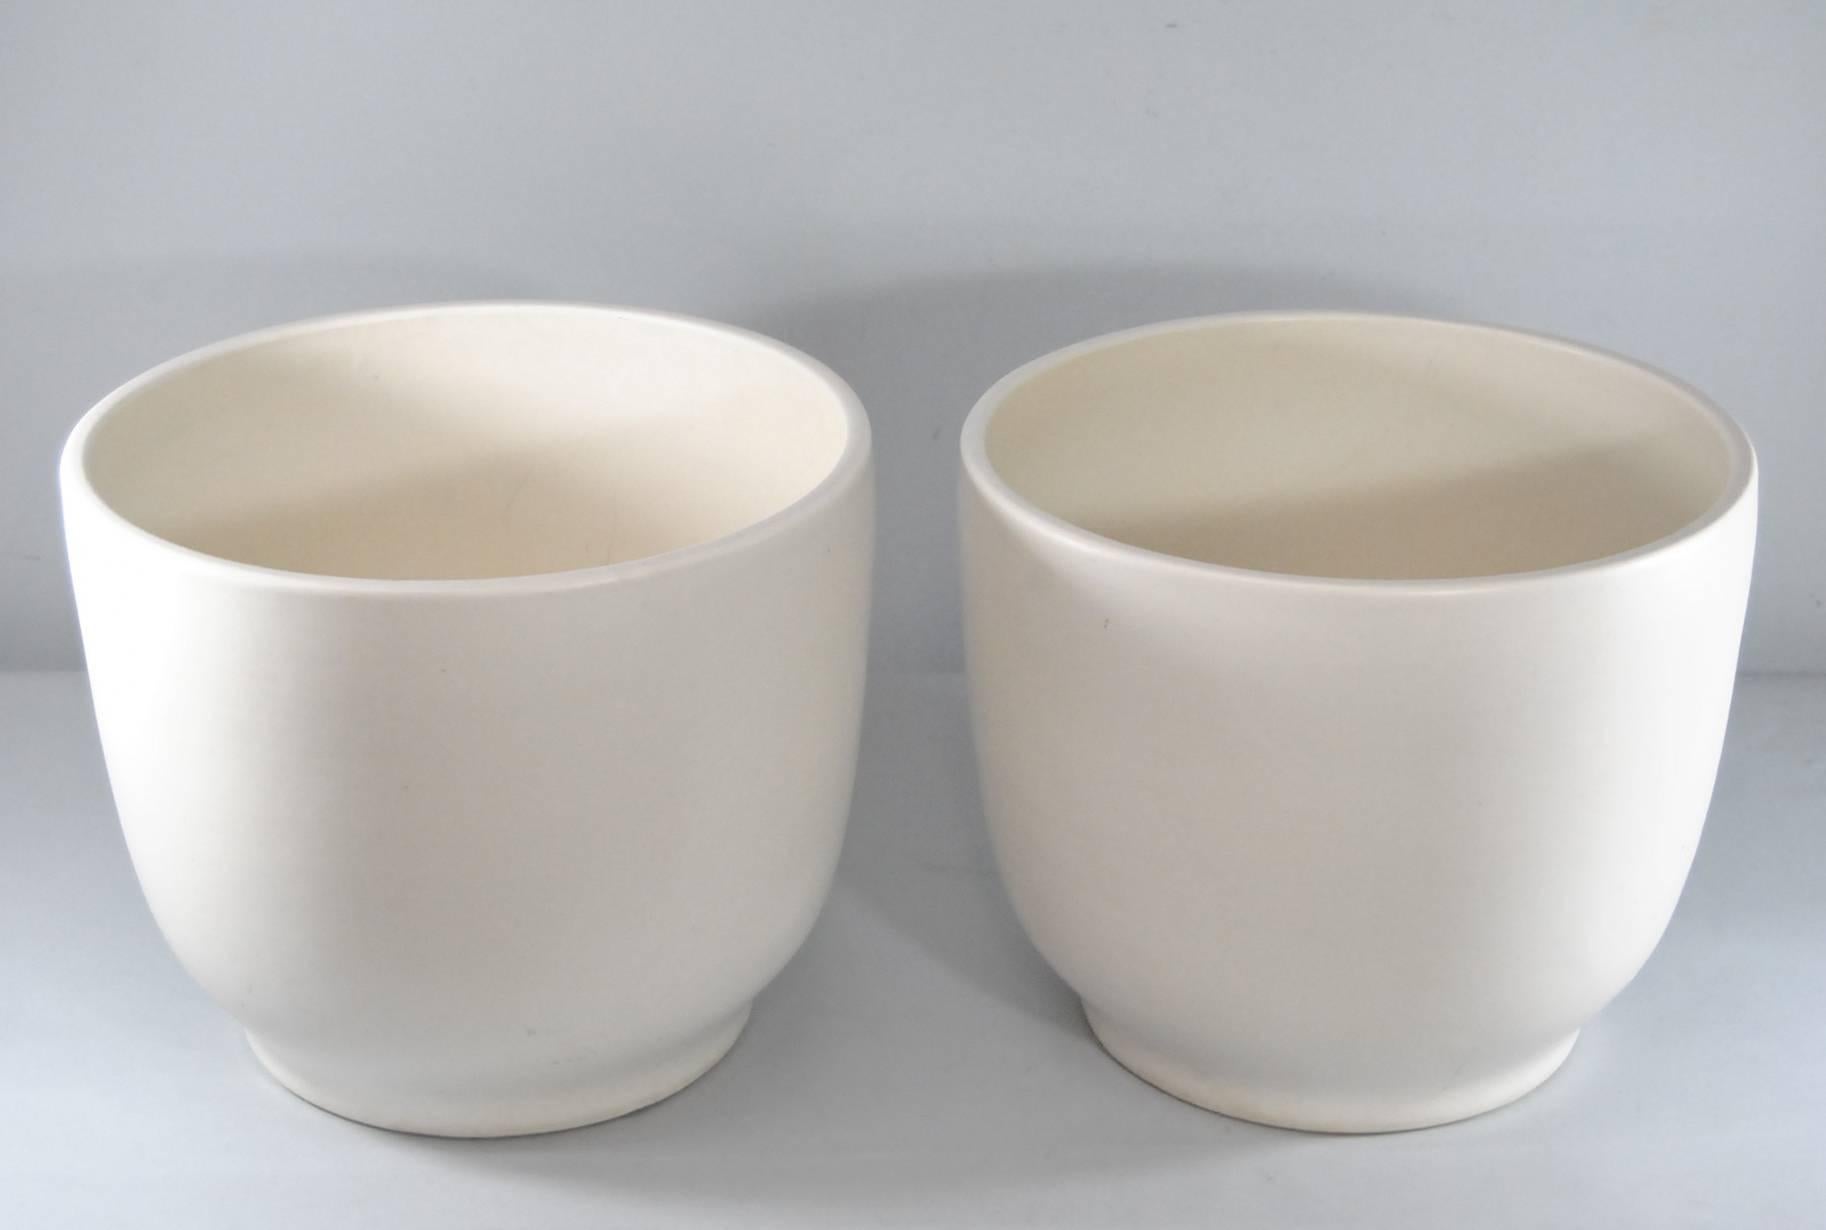 A fantastic matching pair of cream planters by Gainey Ceramics, LaVern, CA. The bottoms are marked Gainey Ceramics, LaVern, CA T17. Very good condition with both having a chip on the bottom as shown in the photos. They are 14.5" T and are